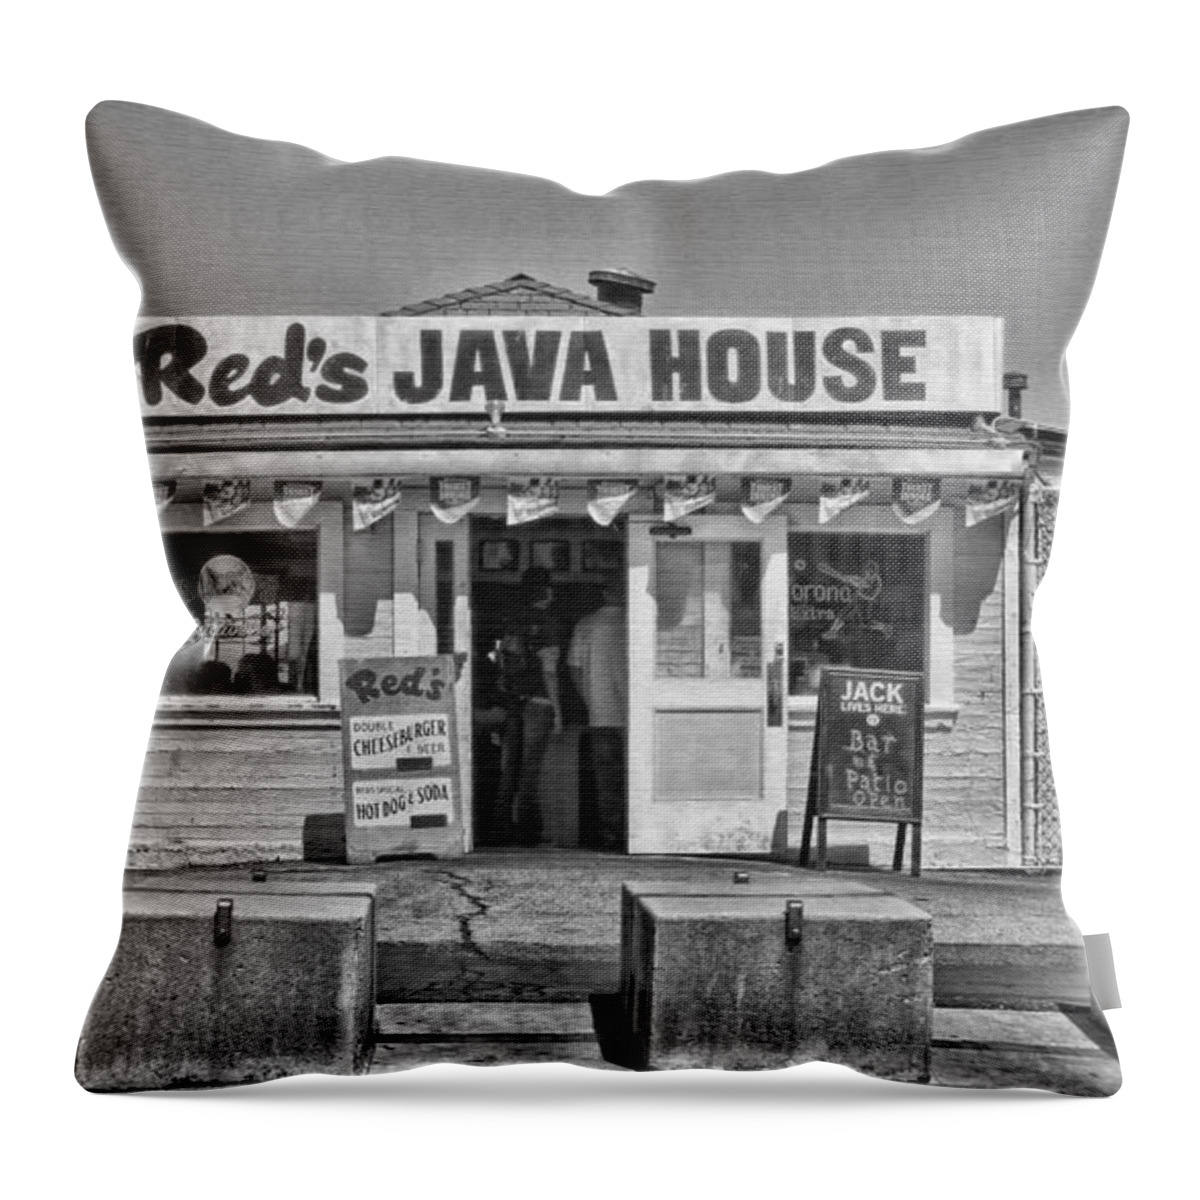 Red's Java House Throw Pillow featuring the photograph Red's Java House San Francisco By Diana Sainz by Diana Raquel Sainz